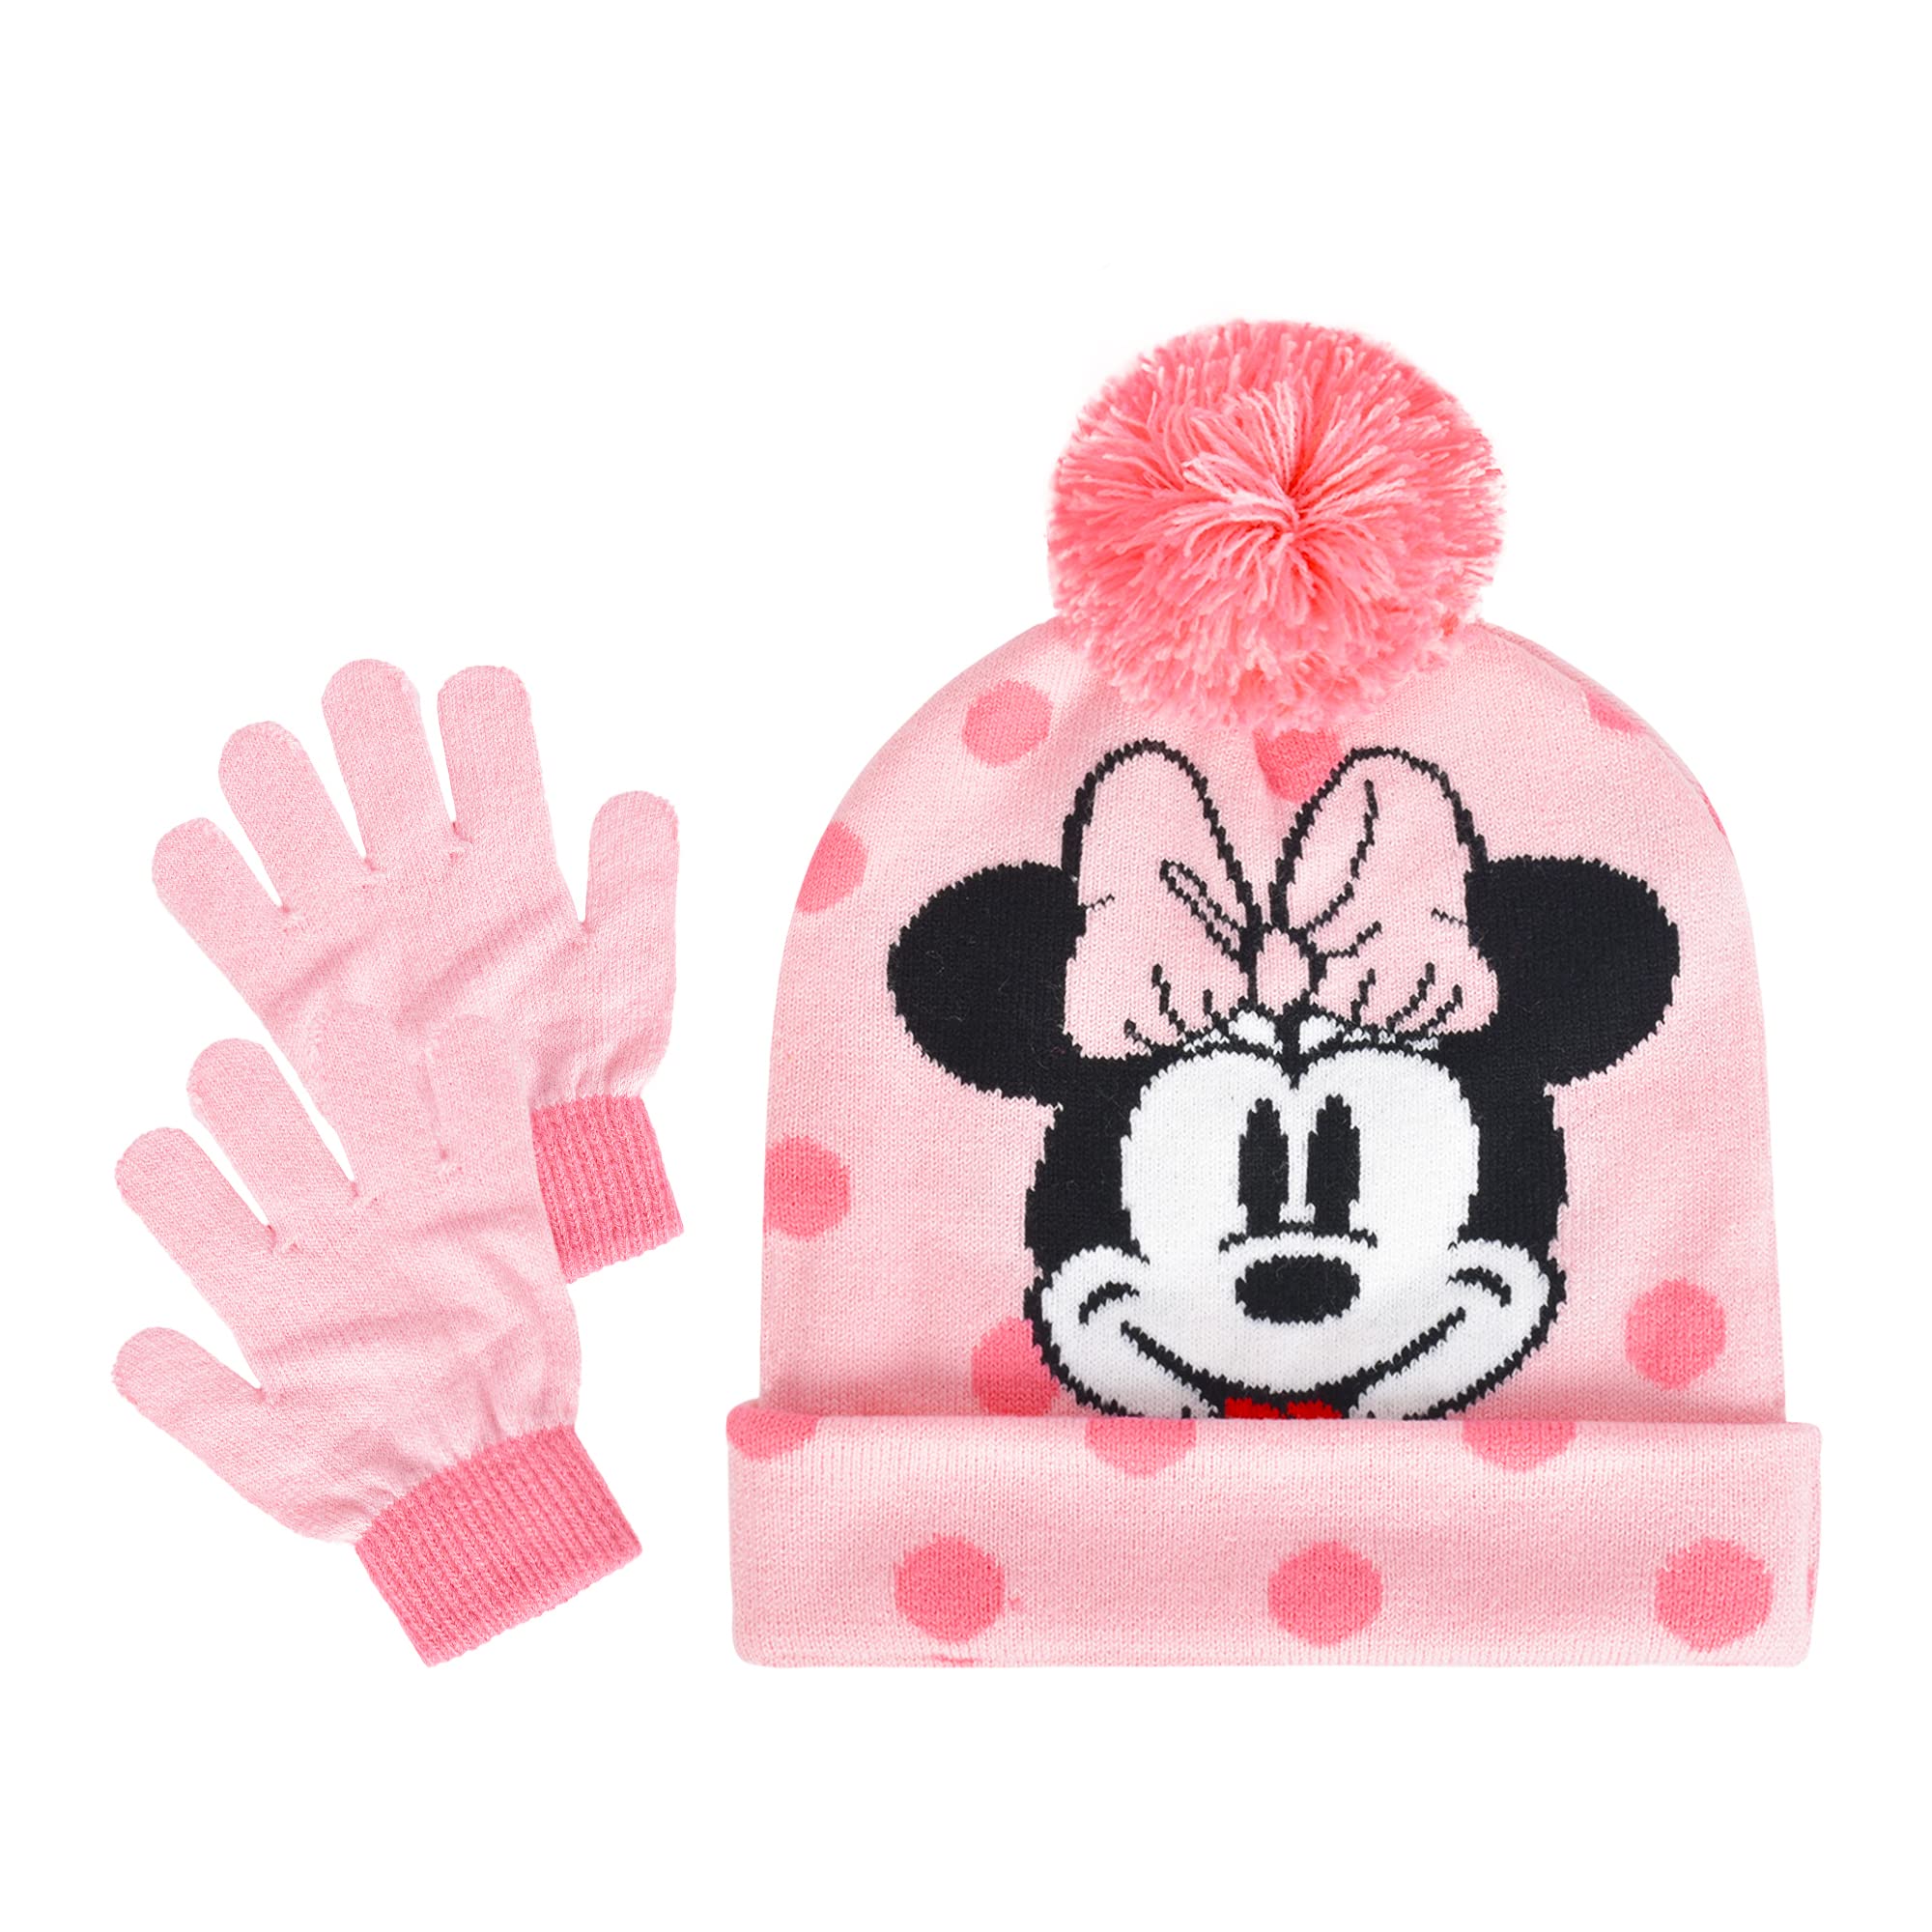 Disney Minnie Mouse Beanie Hat and Gloves Set, Kids Polka Dot Cuffed Winter Knit Cap with Pom and Mittens, Pink, One Size